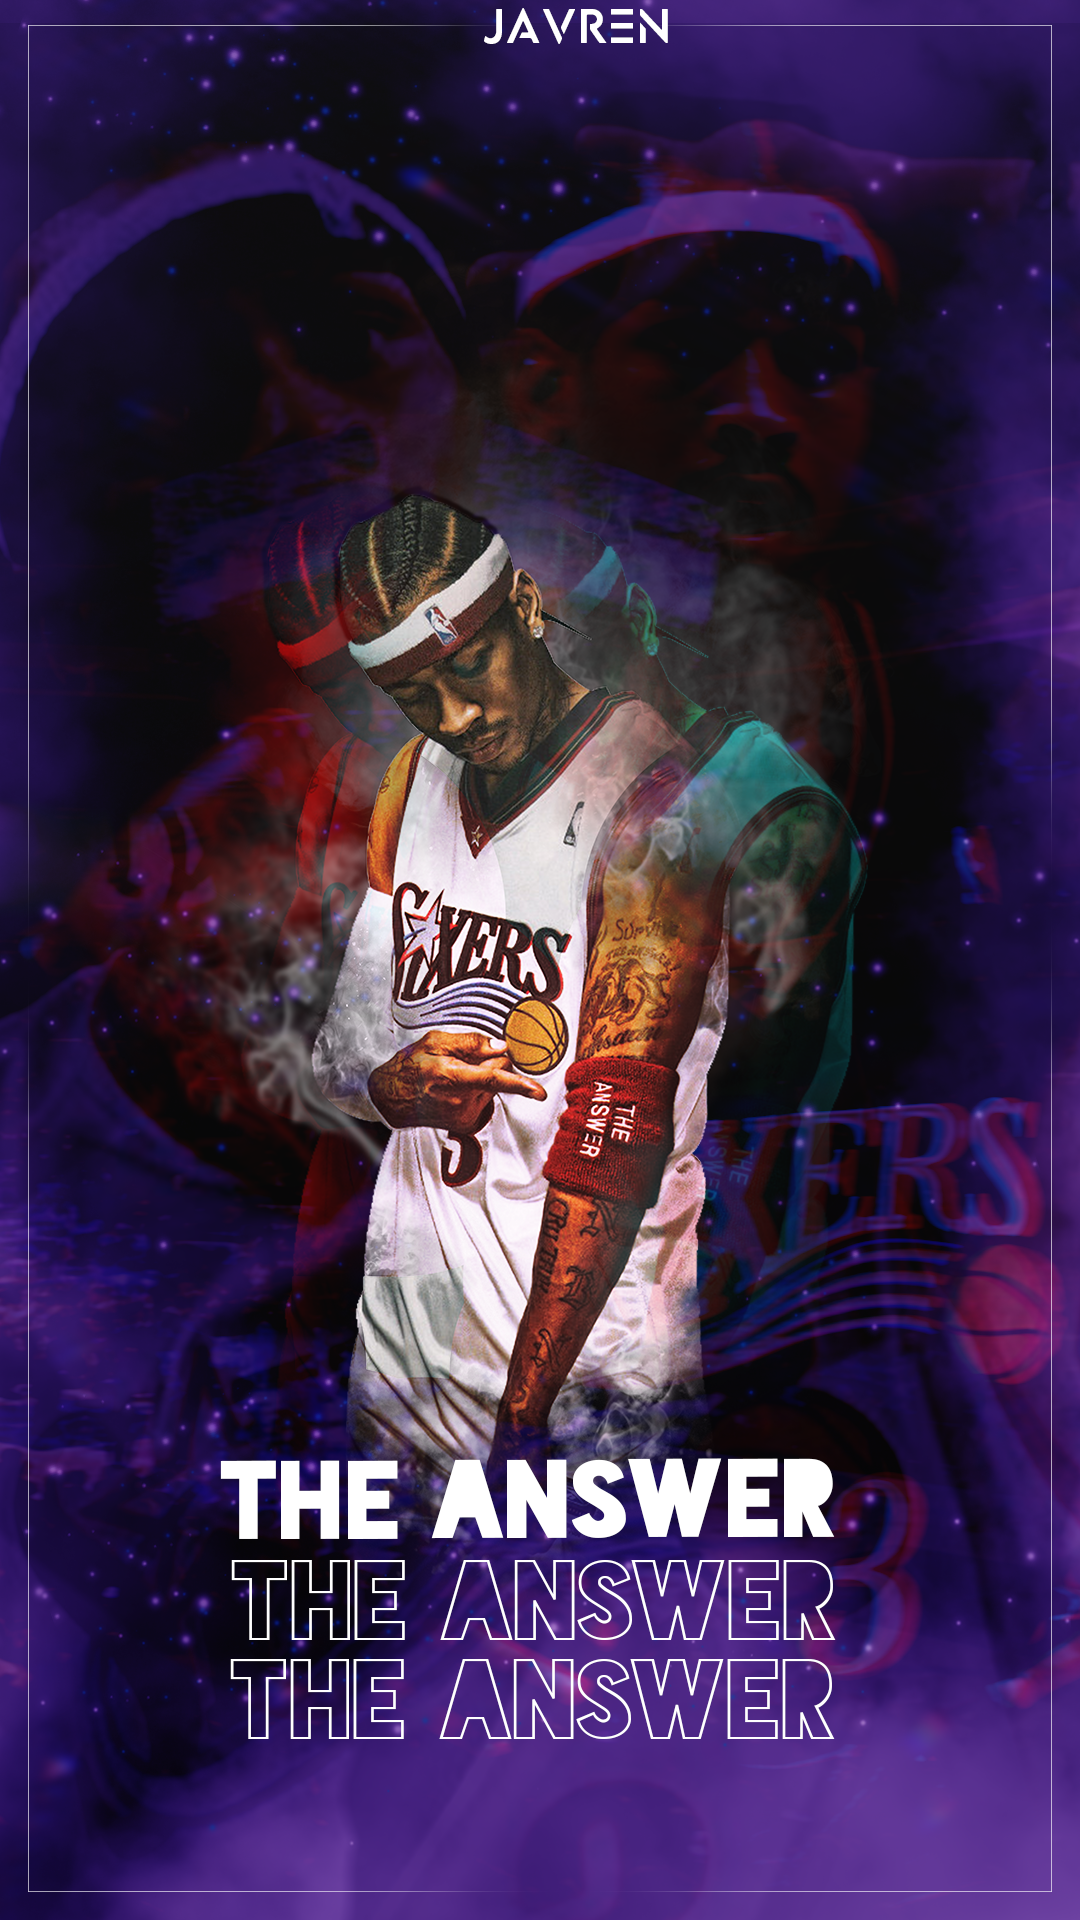 Allen Iverson Wallpapers, Basketball Wallpapers at